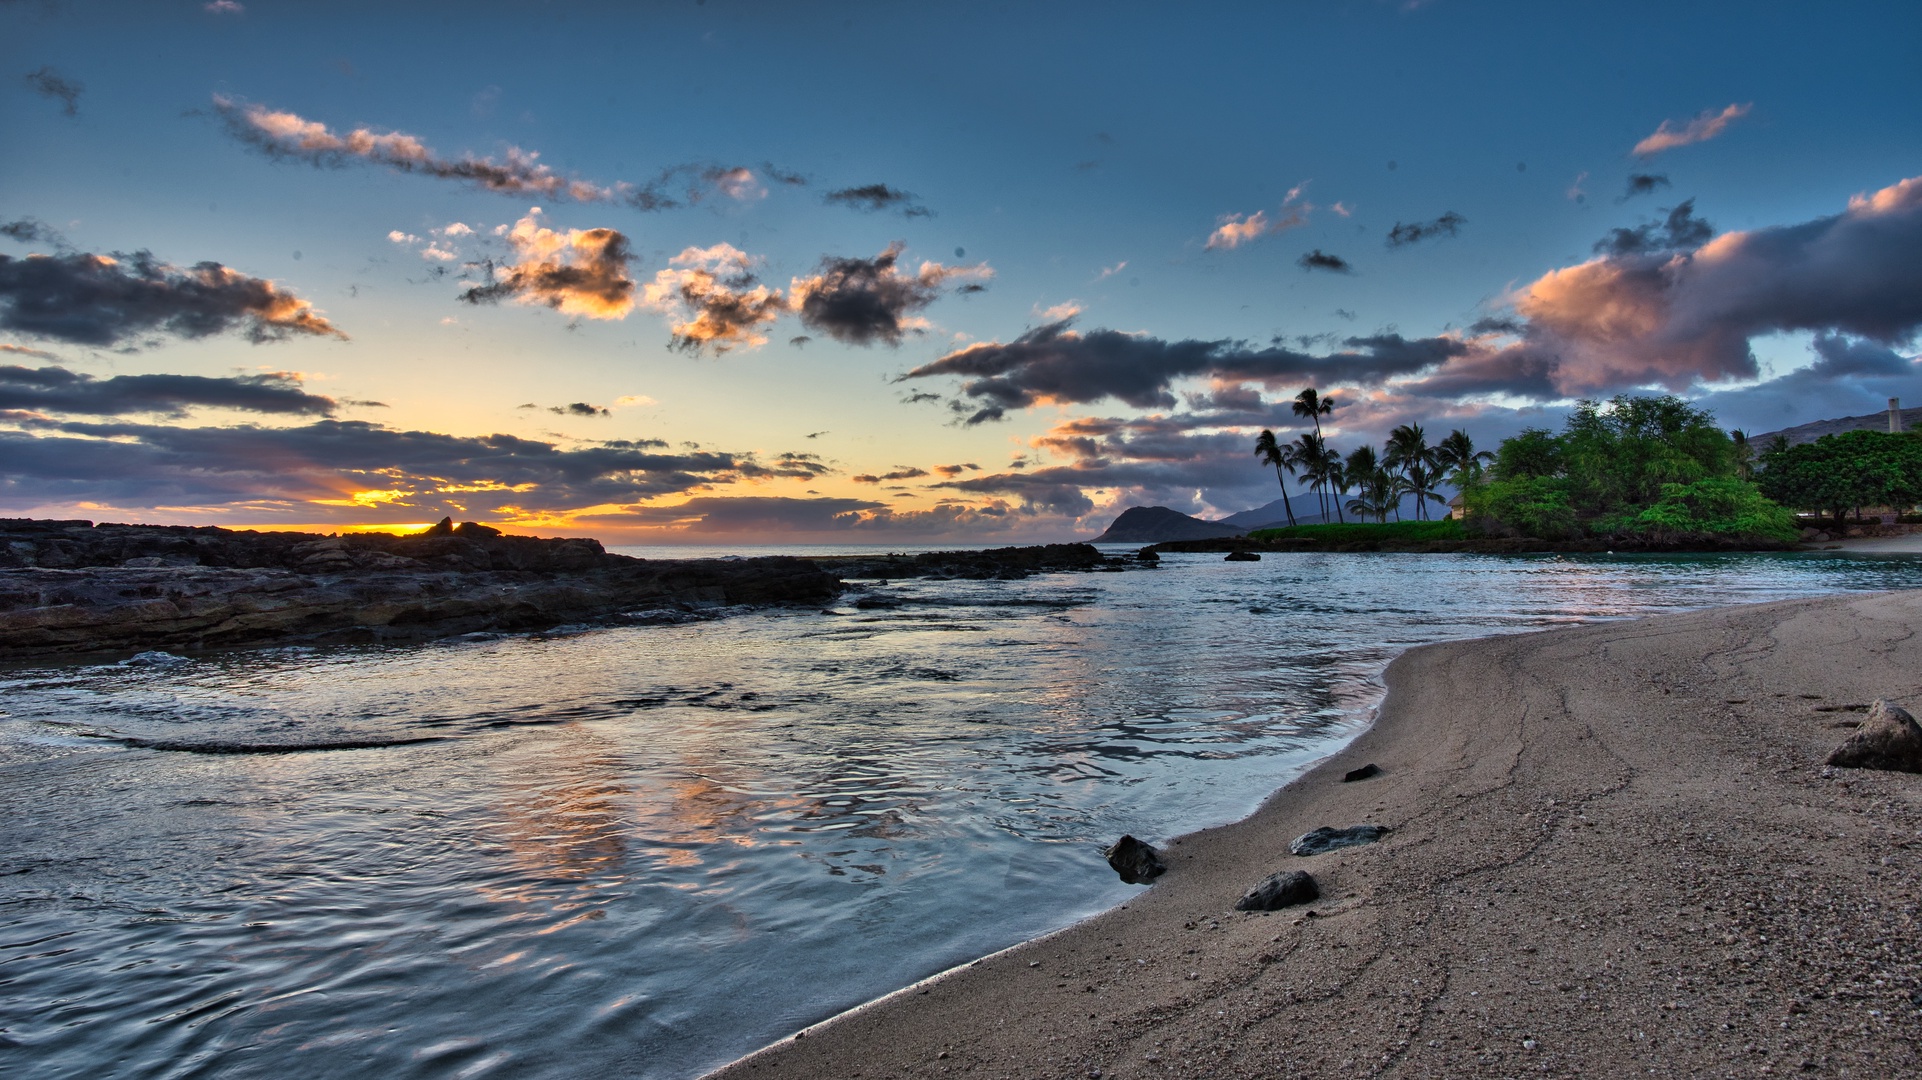 Kapolei Vacation Rentals, Fairways at Ko Olina 20G - Picturesque skies over sand weathered rock formations.